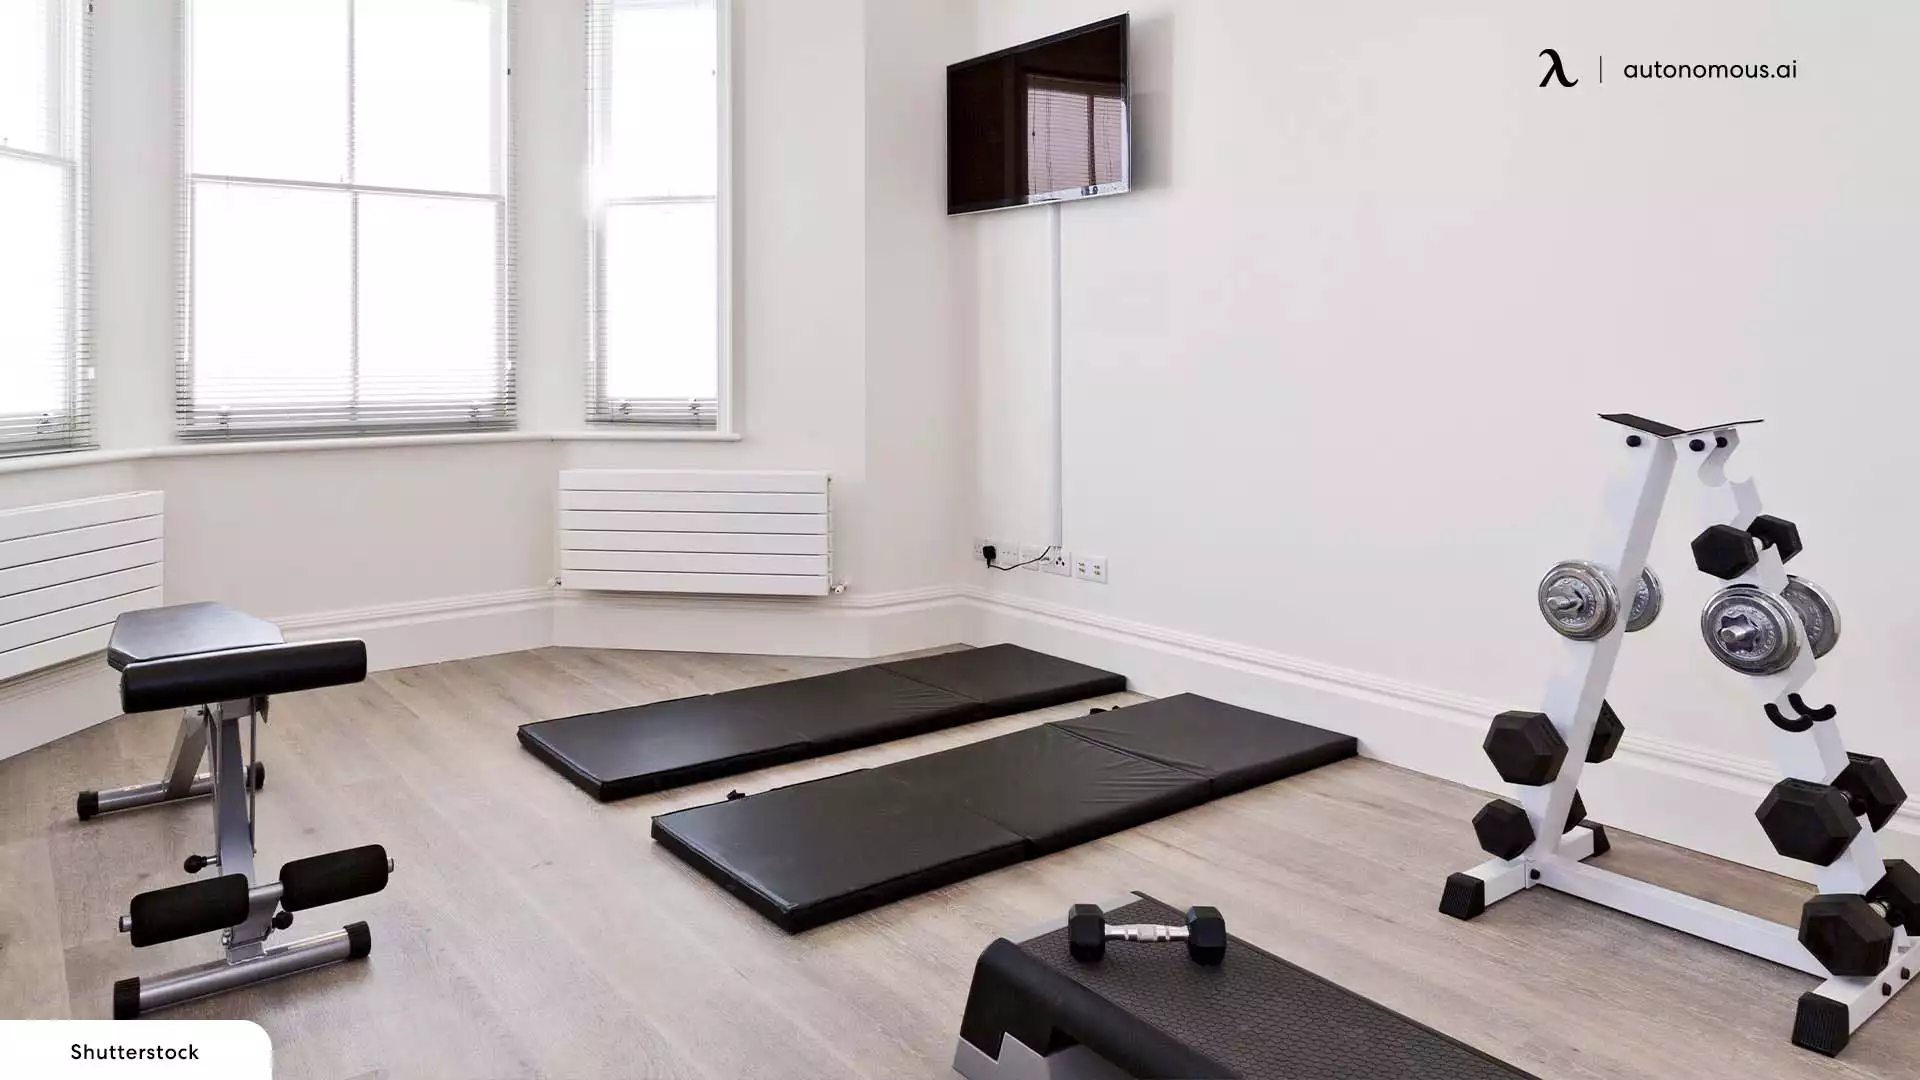 Things to Consider for a Home-Based basement gym setup